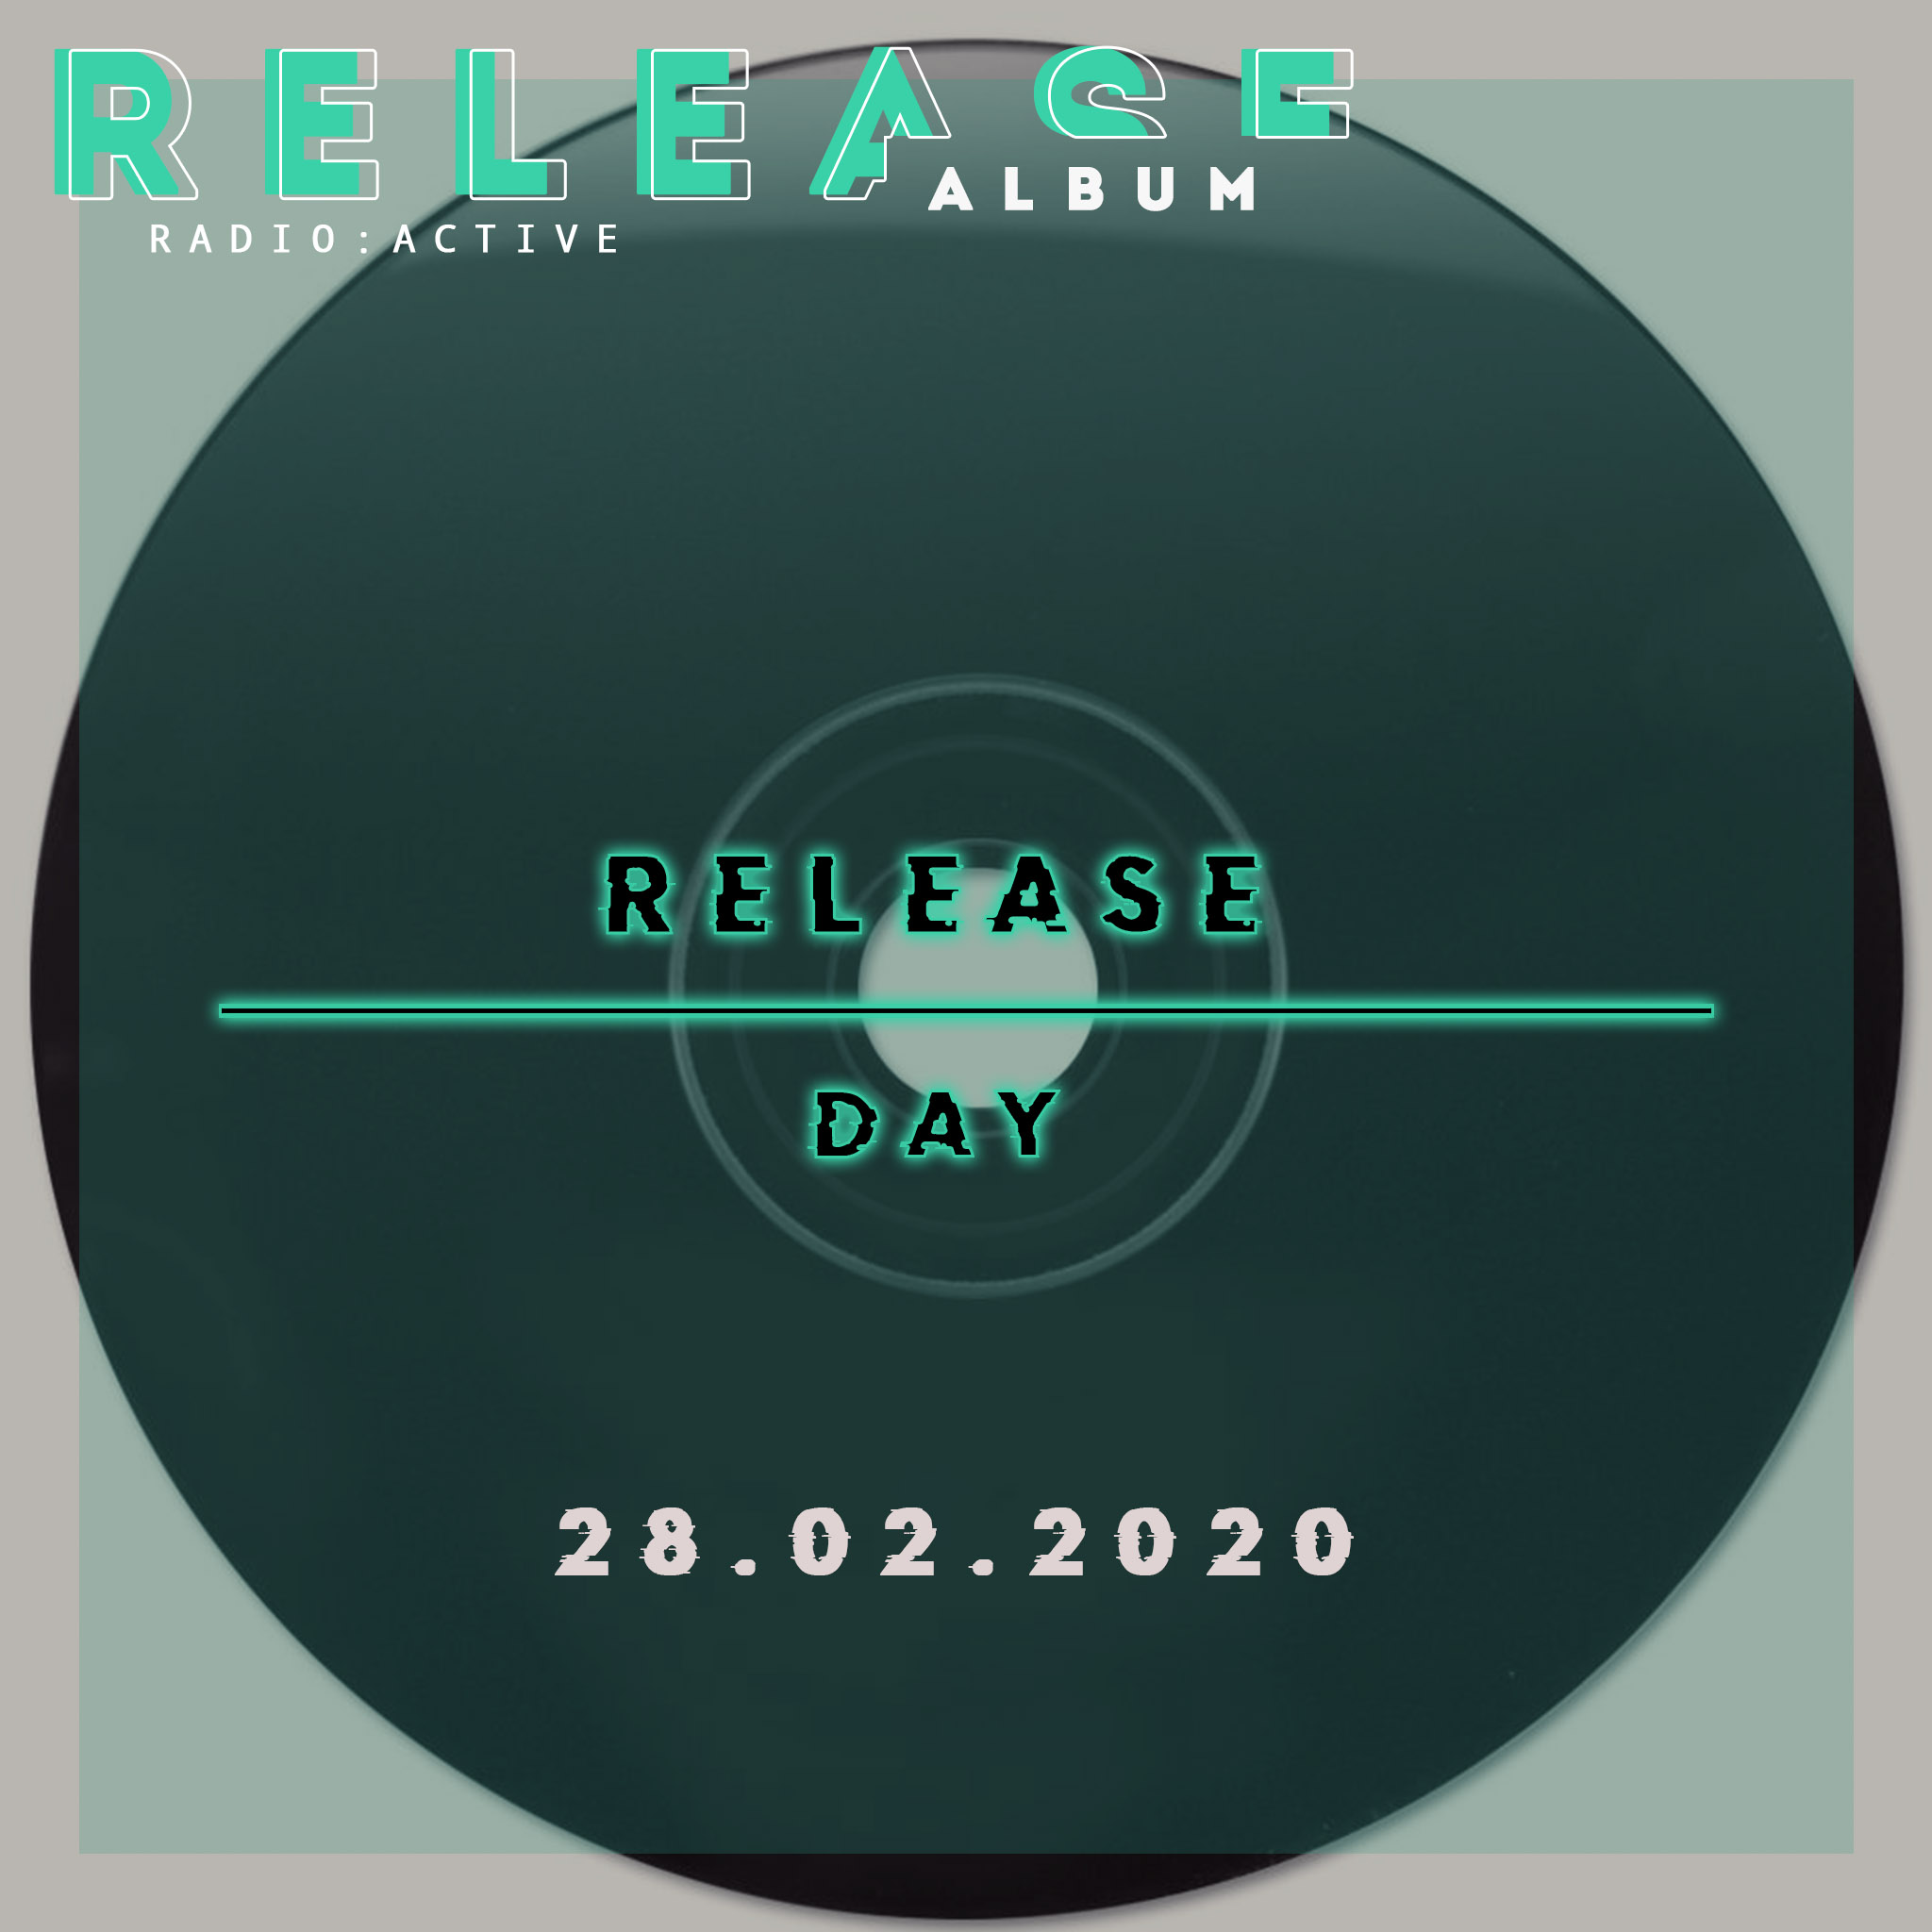 release day 28.02.2020